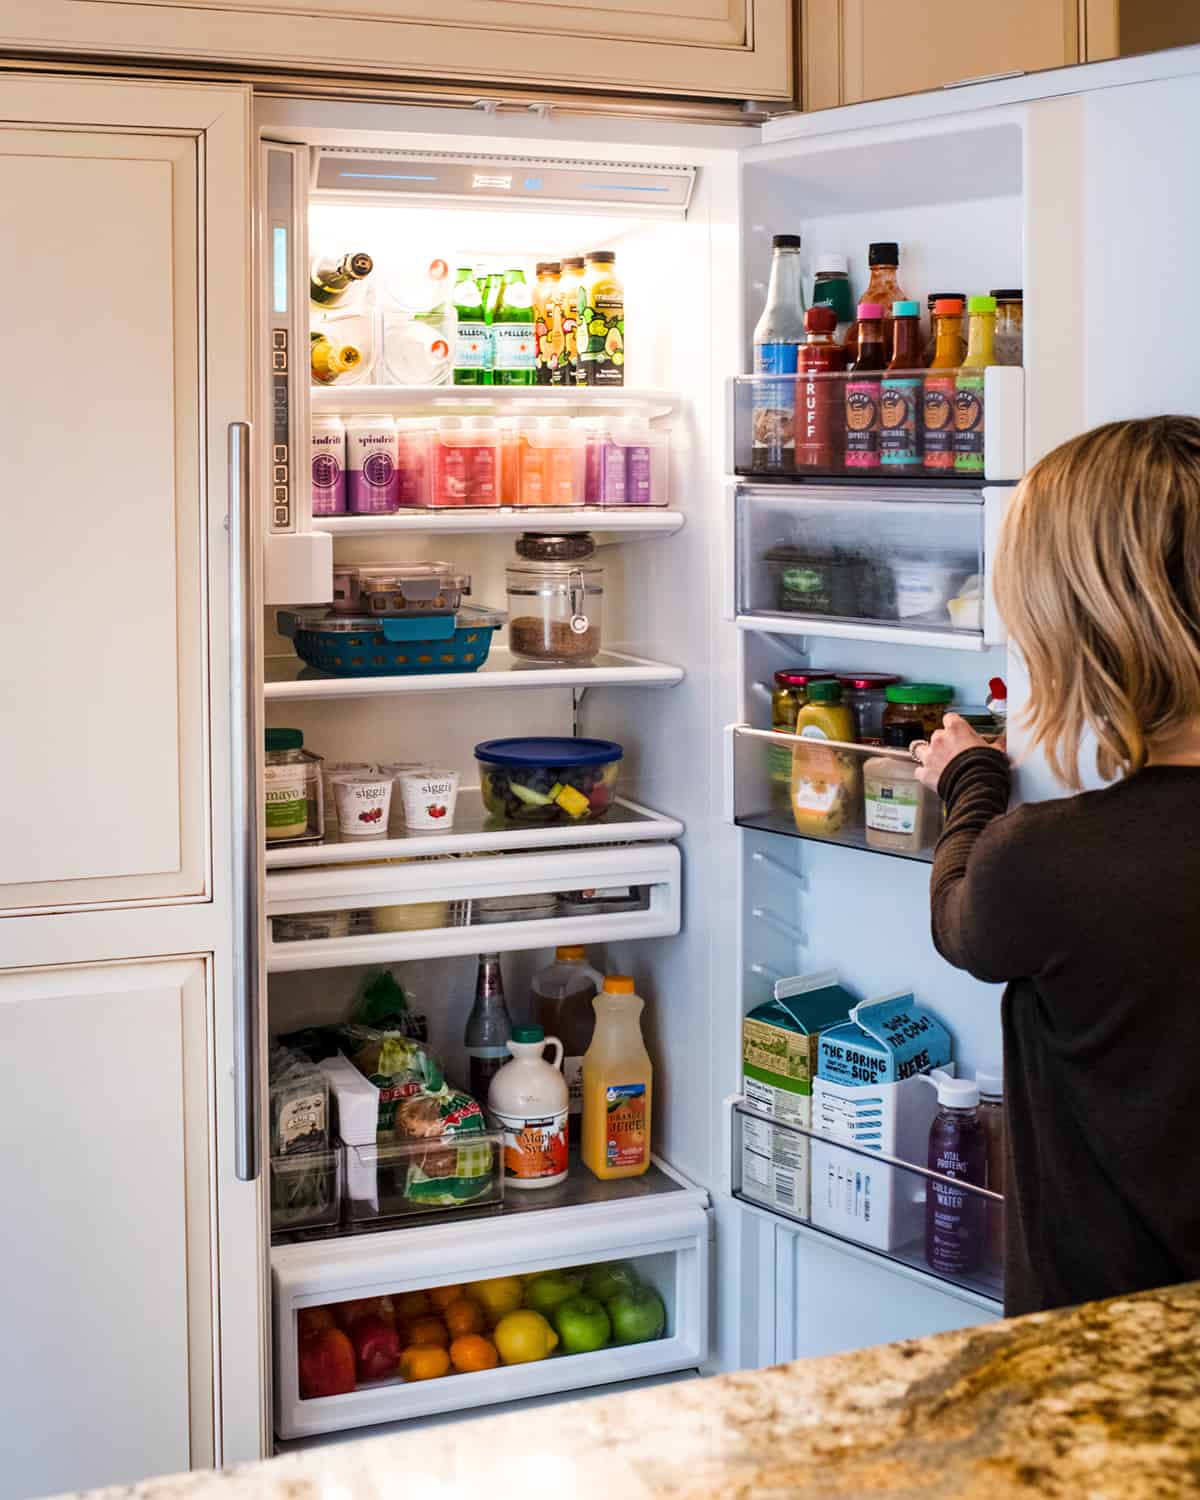 A neat and clean refrigerator with stored leftovers.